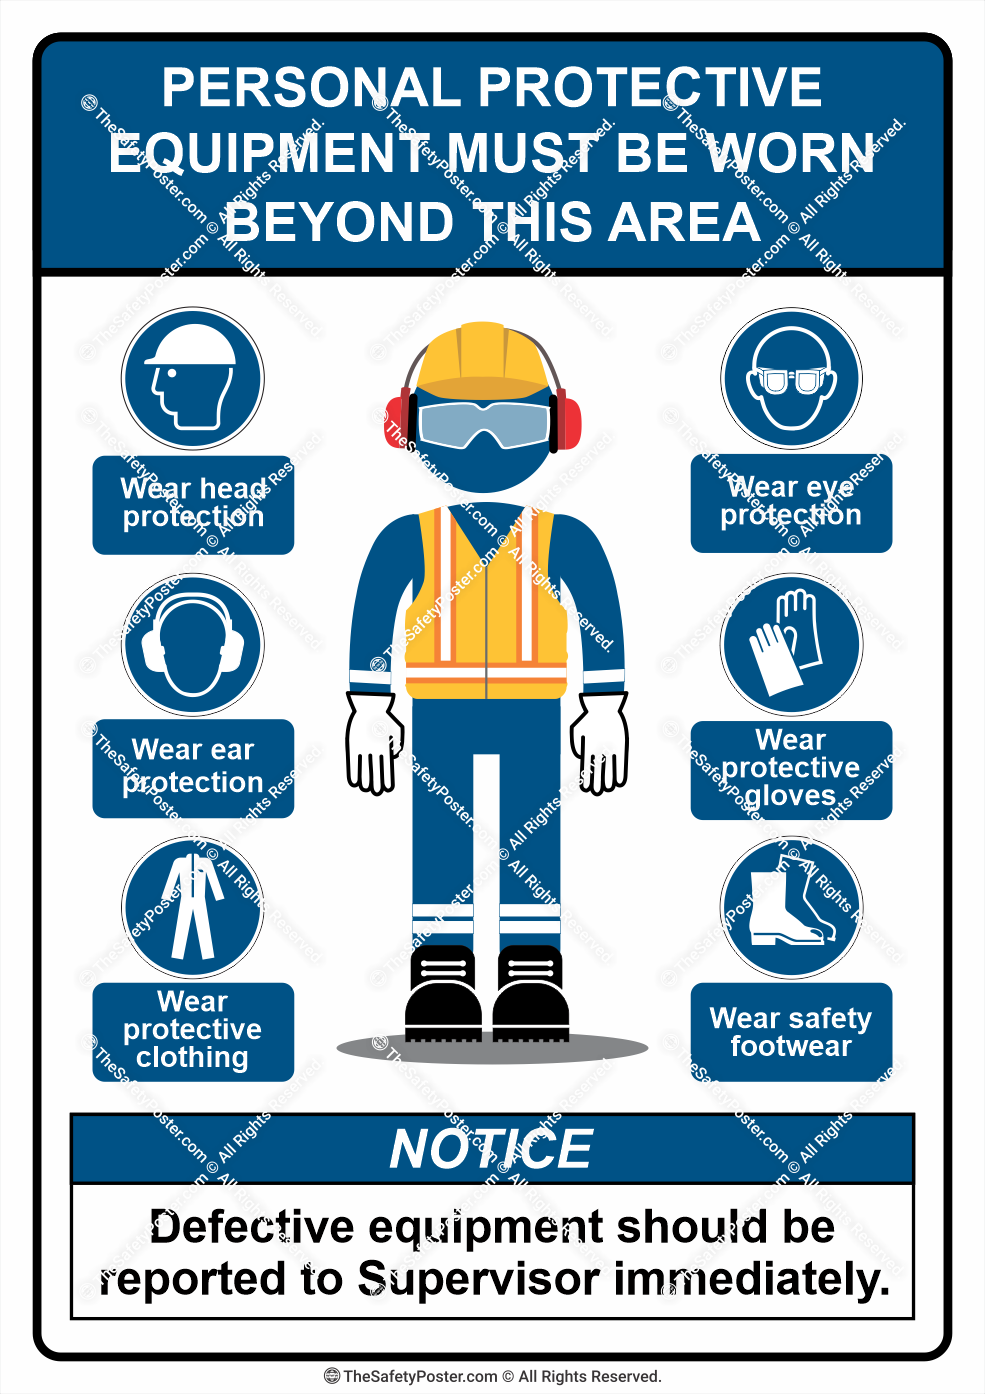 Ppe Must Be Worn Personal Protective Equipment Ppe Safety Ppe Poster Ppe Safety Board